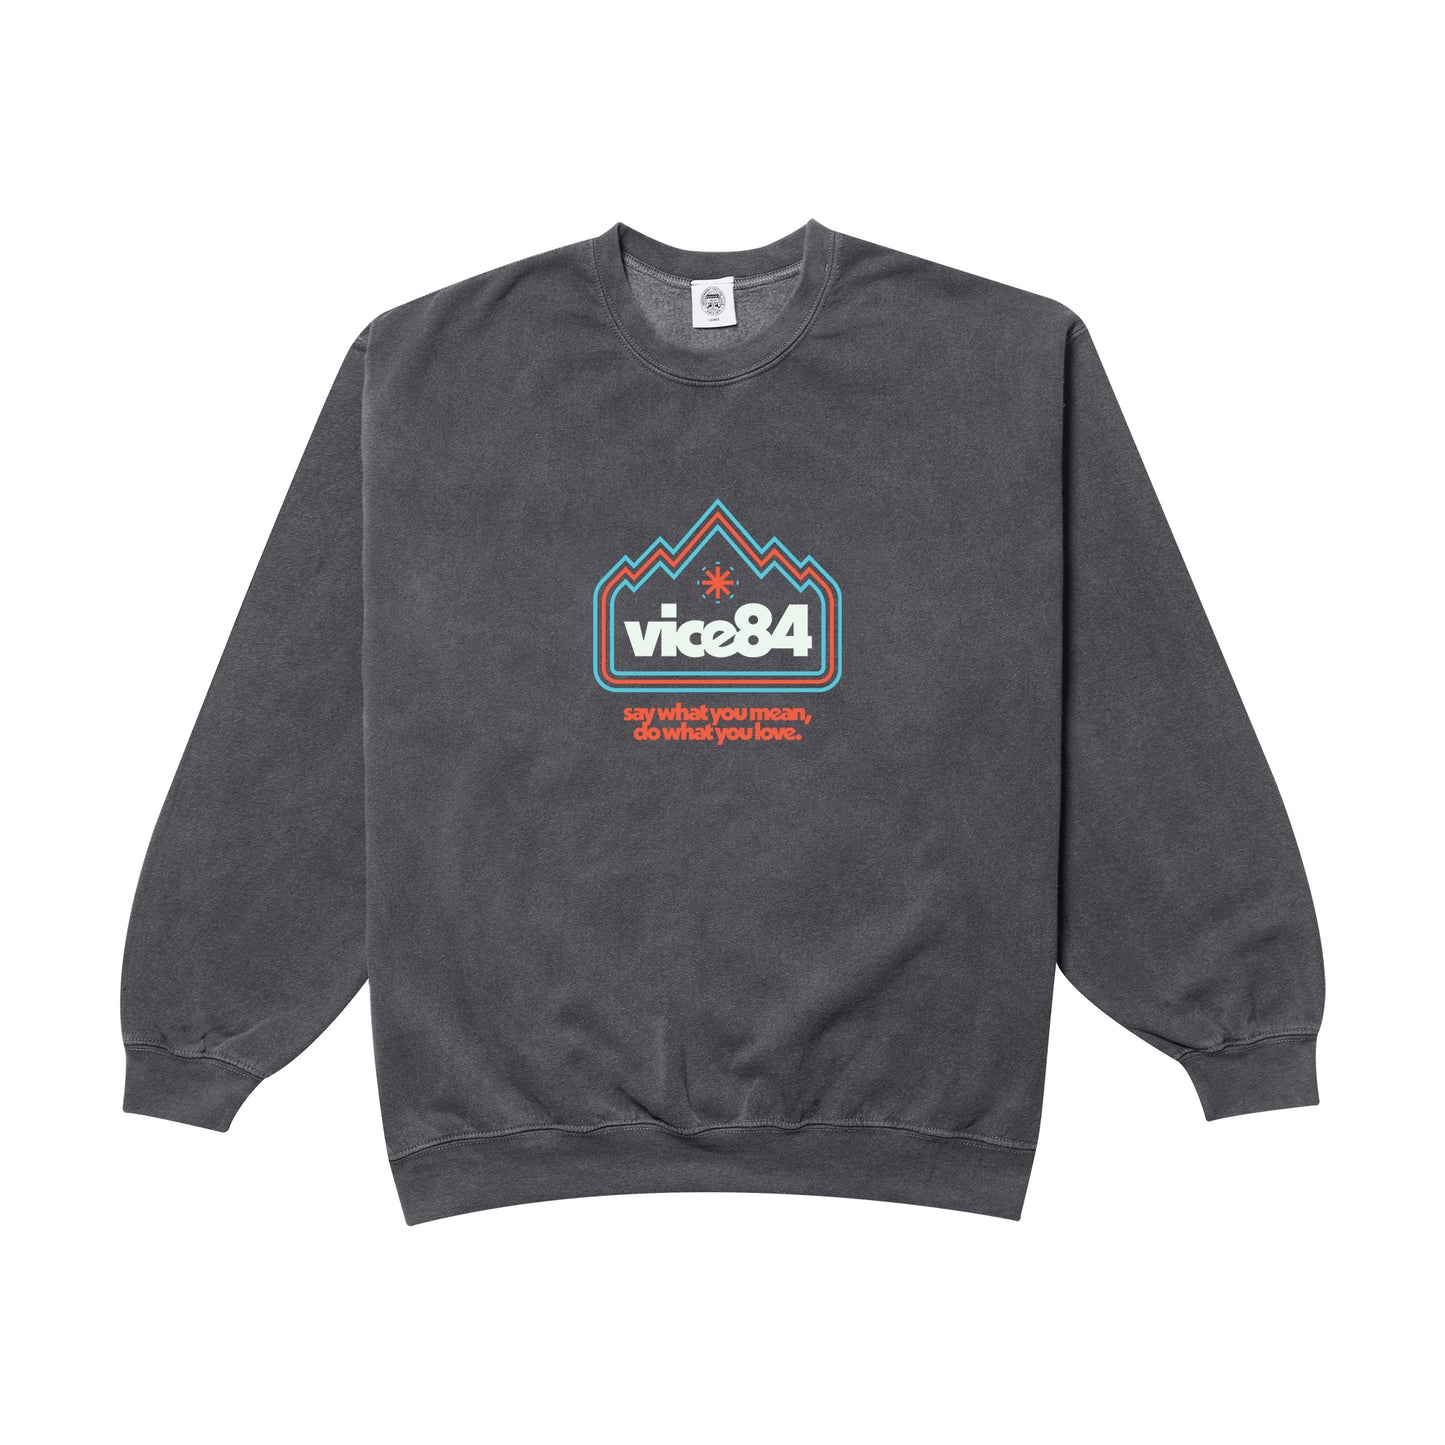 Vice 84 'Discovery' Vintage Washed Sweatshirt - Charcoal – UN:IK Clothing